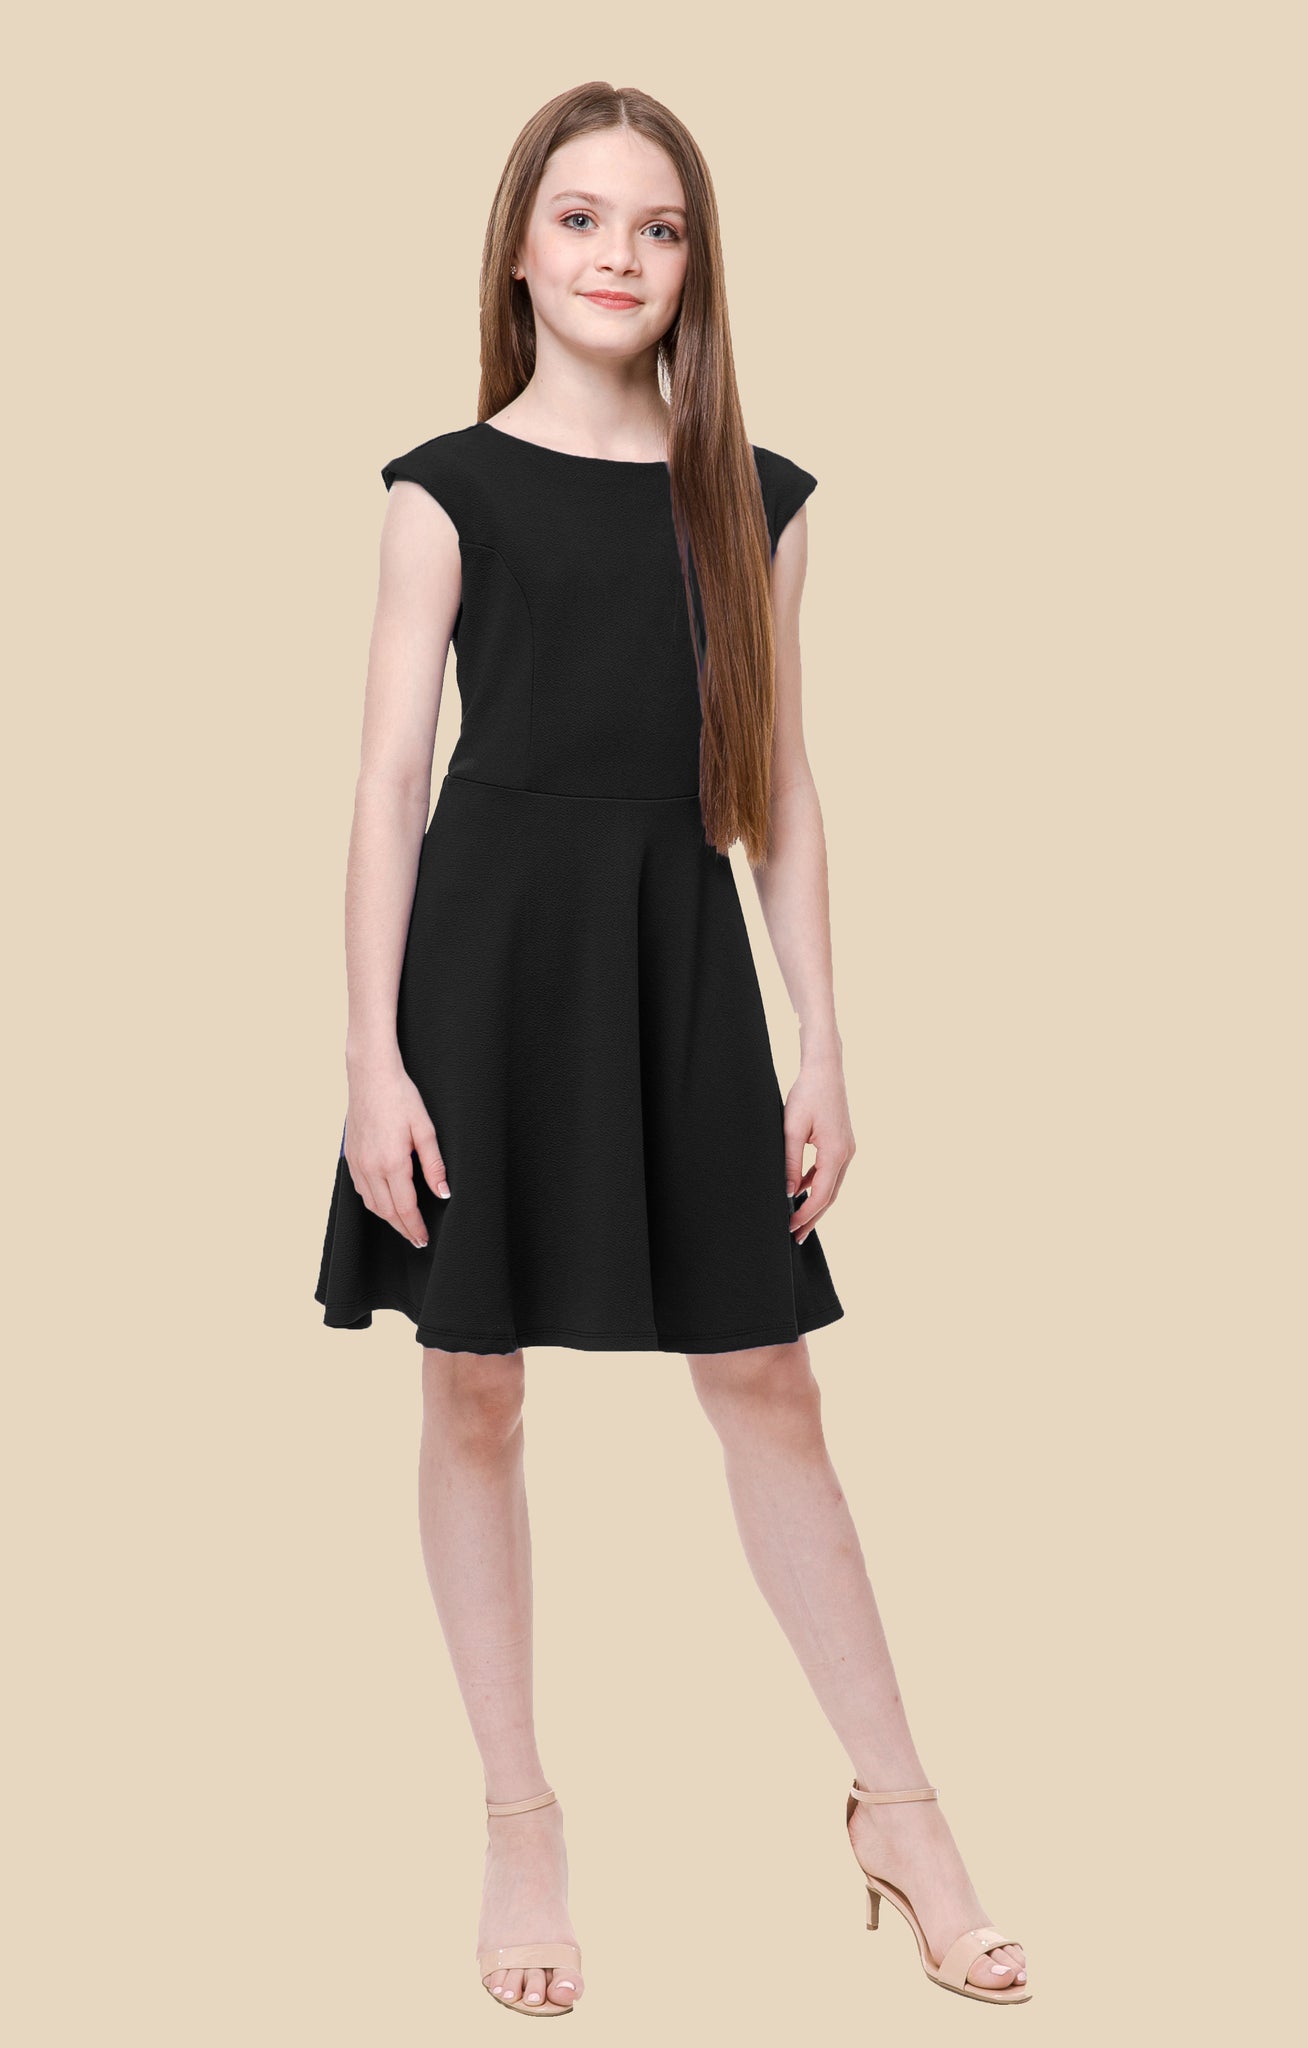 The cap sleeve textured fit and flare dress is shown in black with high neck line, shoulder coverage and lower v-back detailing for a chic and sophisticated look. This dress can be worn to a more coservative special occasion event like cotillion, graduation, or religious service like a bat mitzvah service or church ceremony.